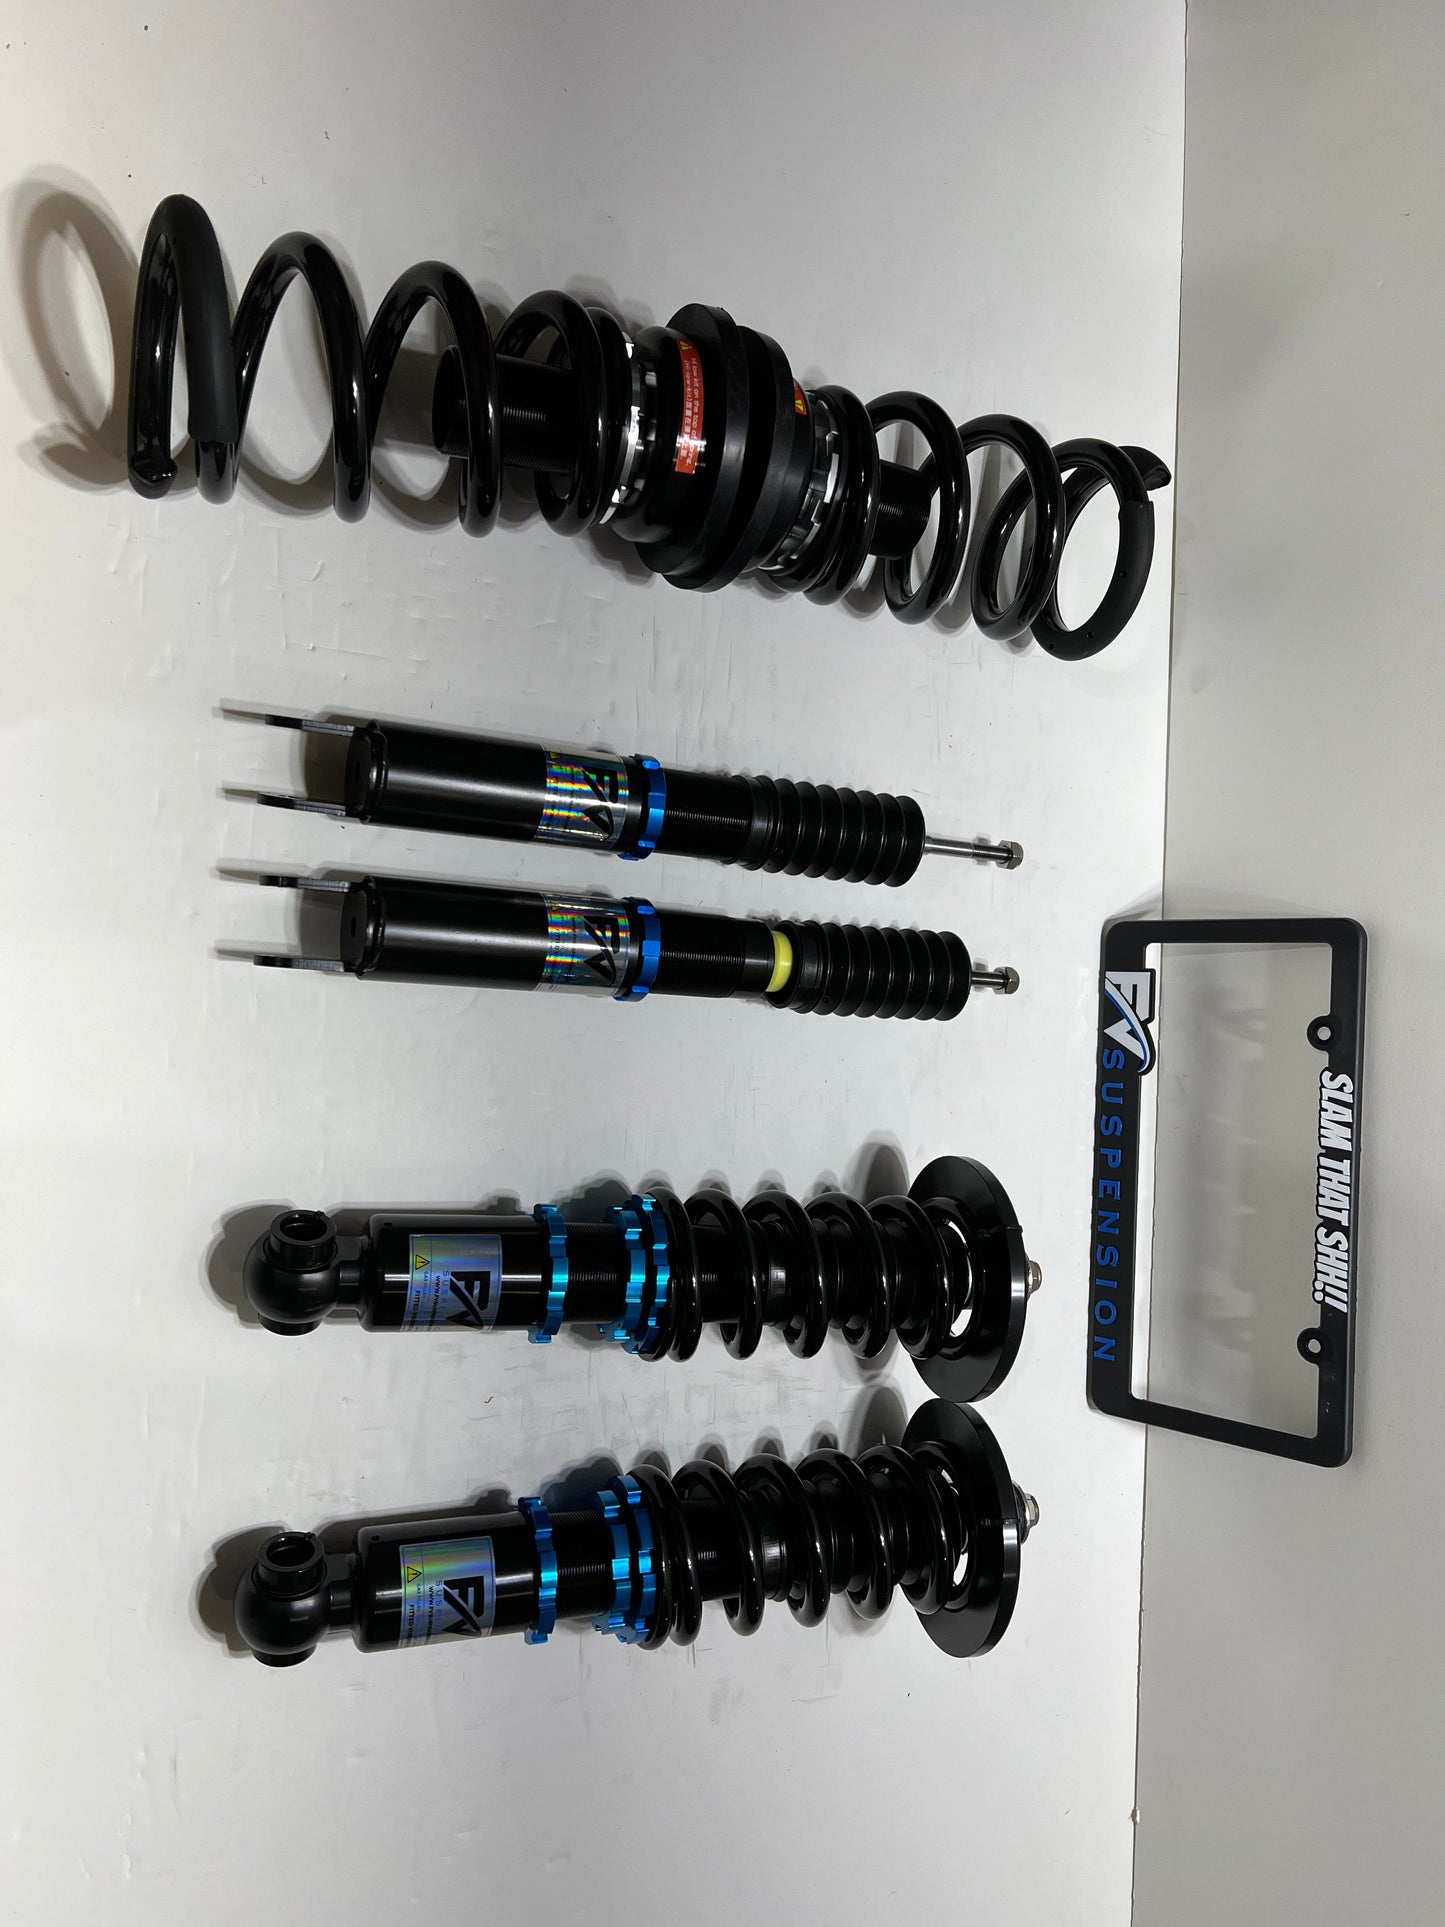 FV Suspension 3P Tier 2 Complete Air Ride kit for 08-13 Cadillac CTS AWD - FVALtier2kit156